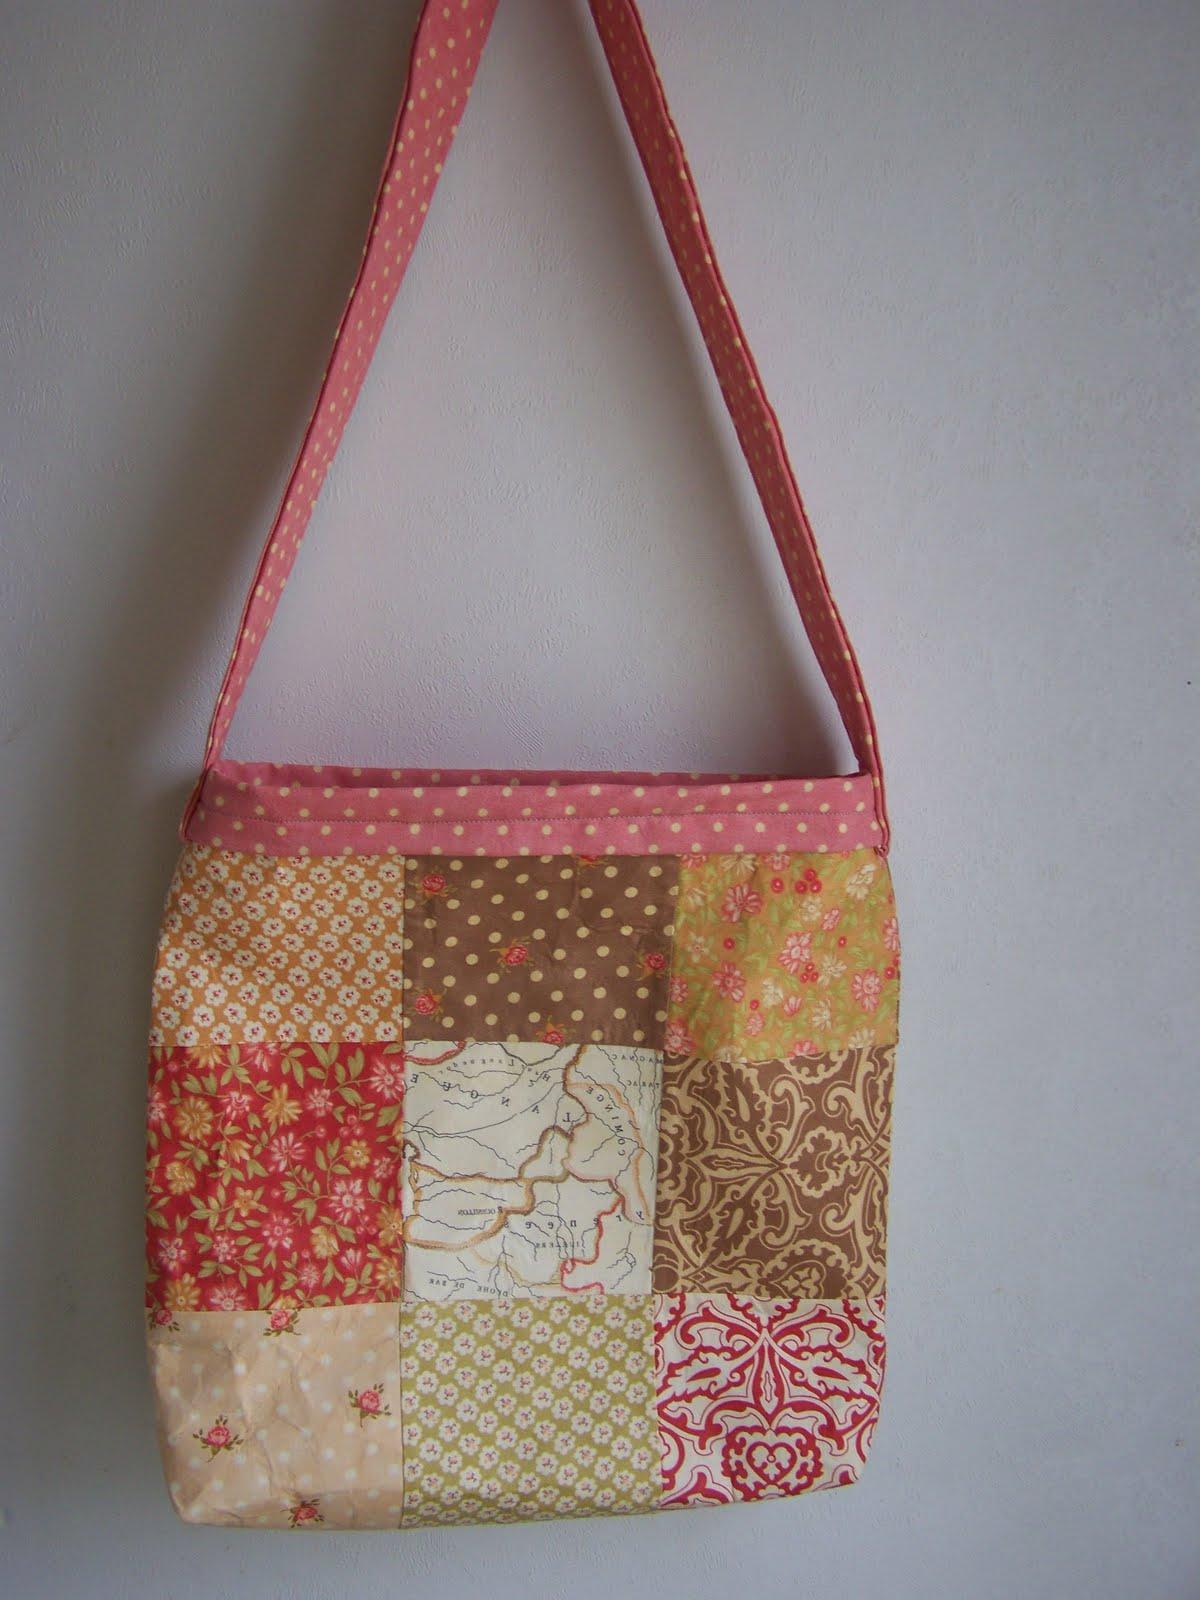 I just finished this bag this